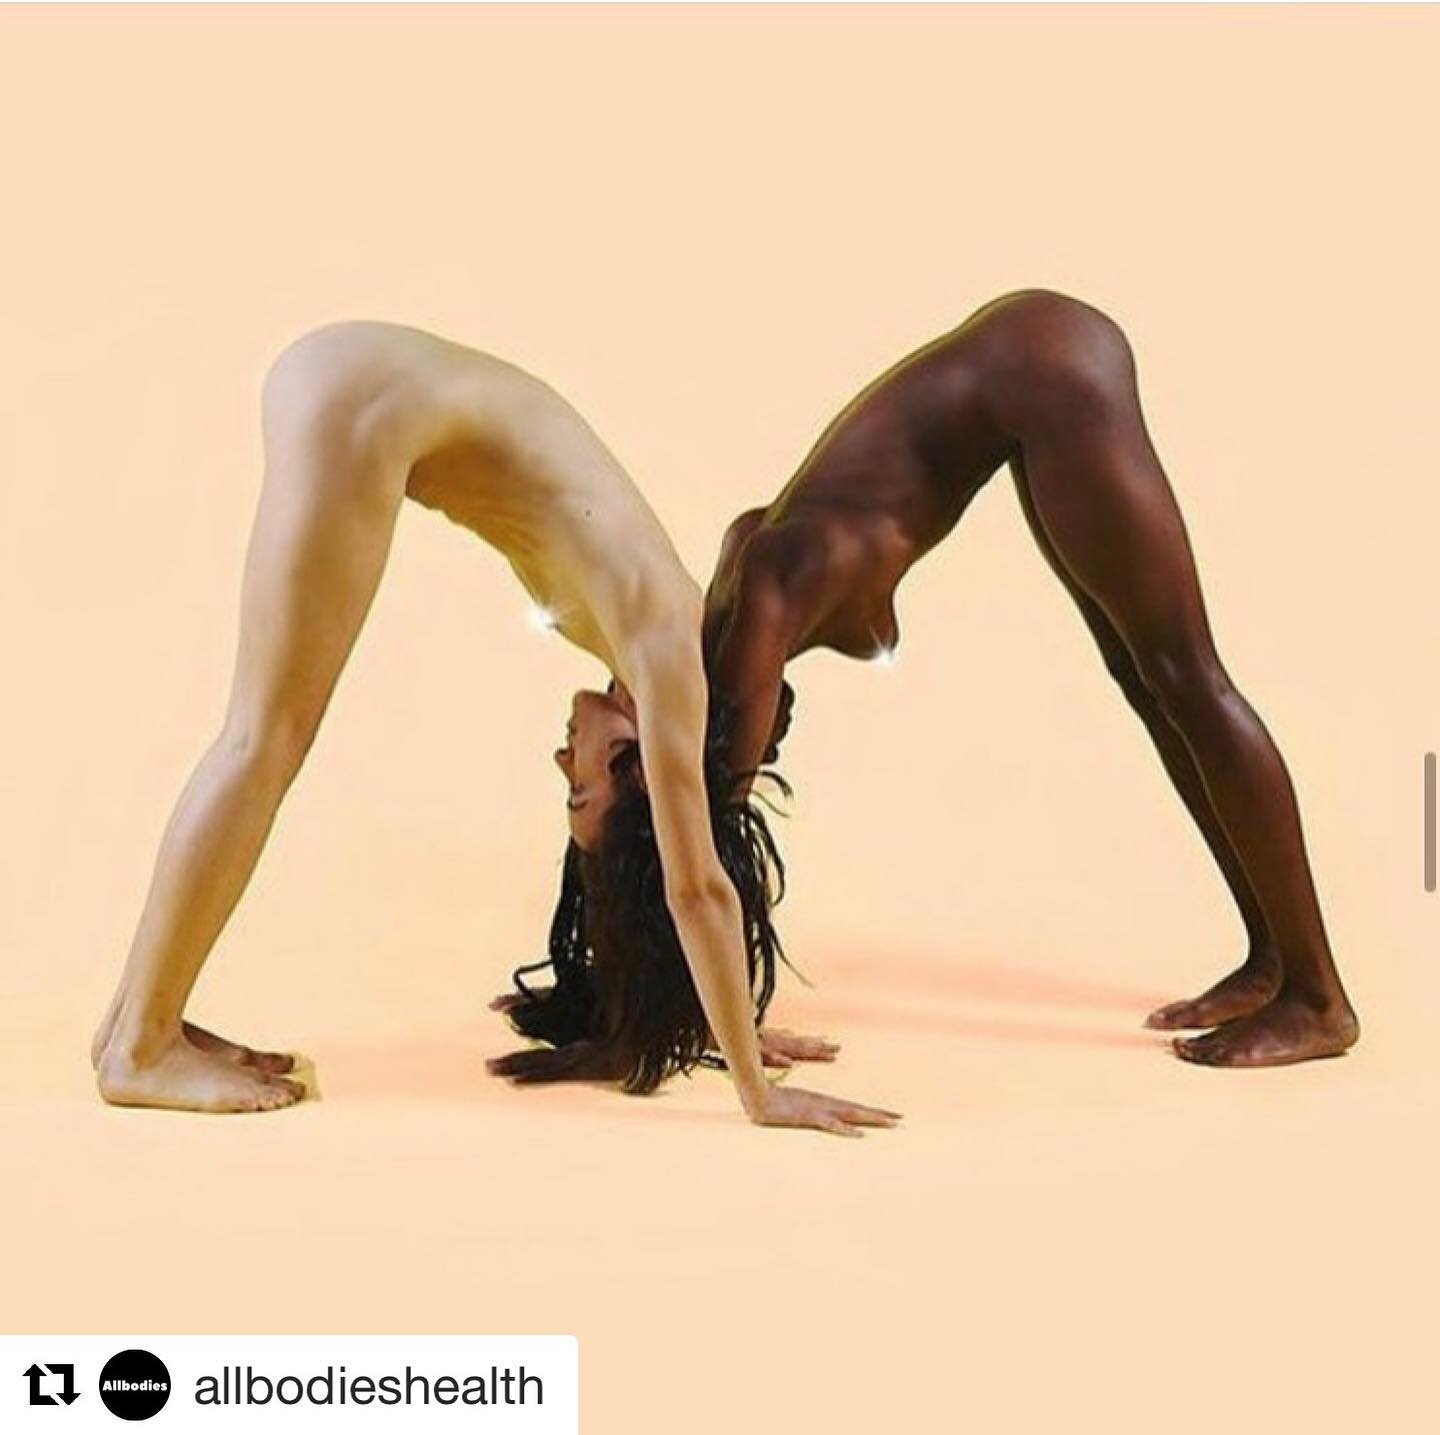 If you&rsquo;re curious about what #systemicracismracism looks like, look no further than a nursing student&rsquo;s textbook. Thanks for breaking this down, @allbodieshealth. 👇🏿👇🏾👇🏽

#Repost @allbodieshealth with @get_repost
・・・
M is for medica